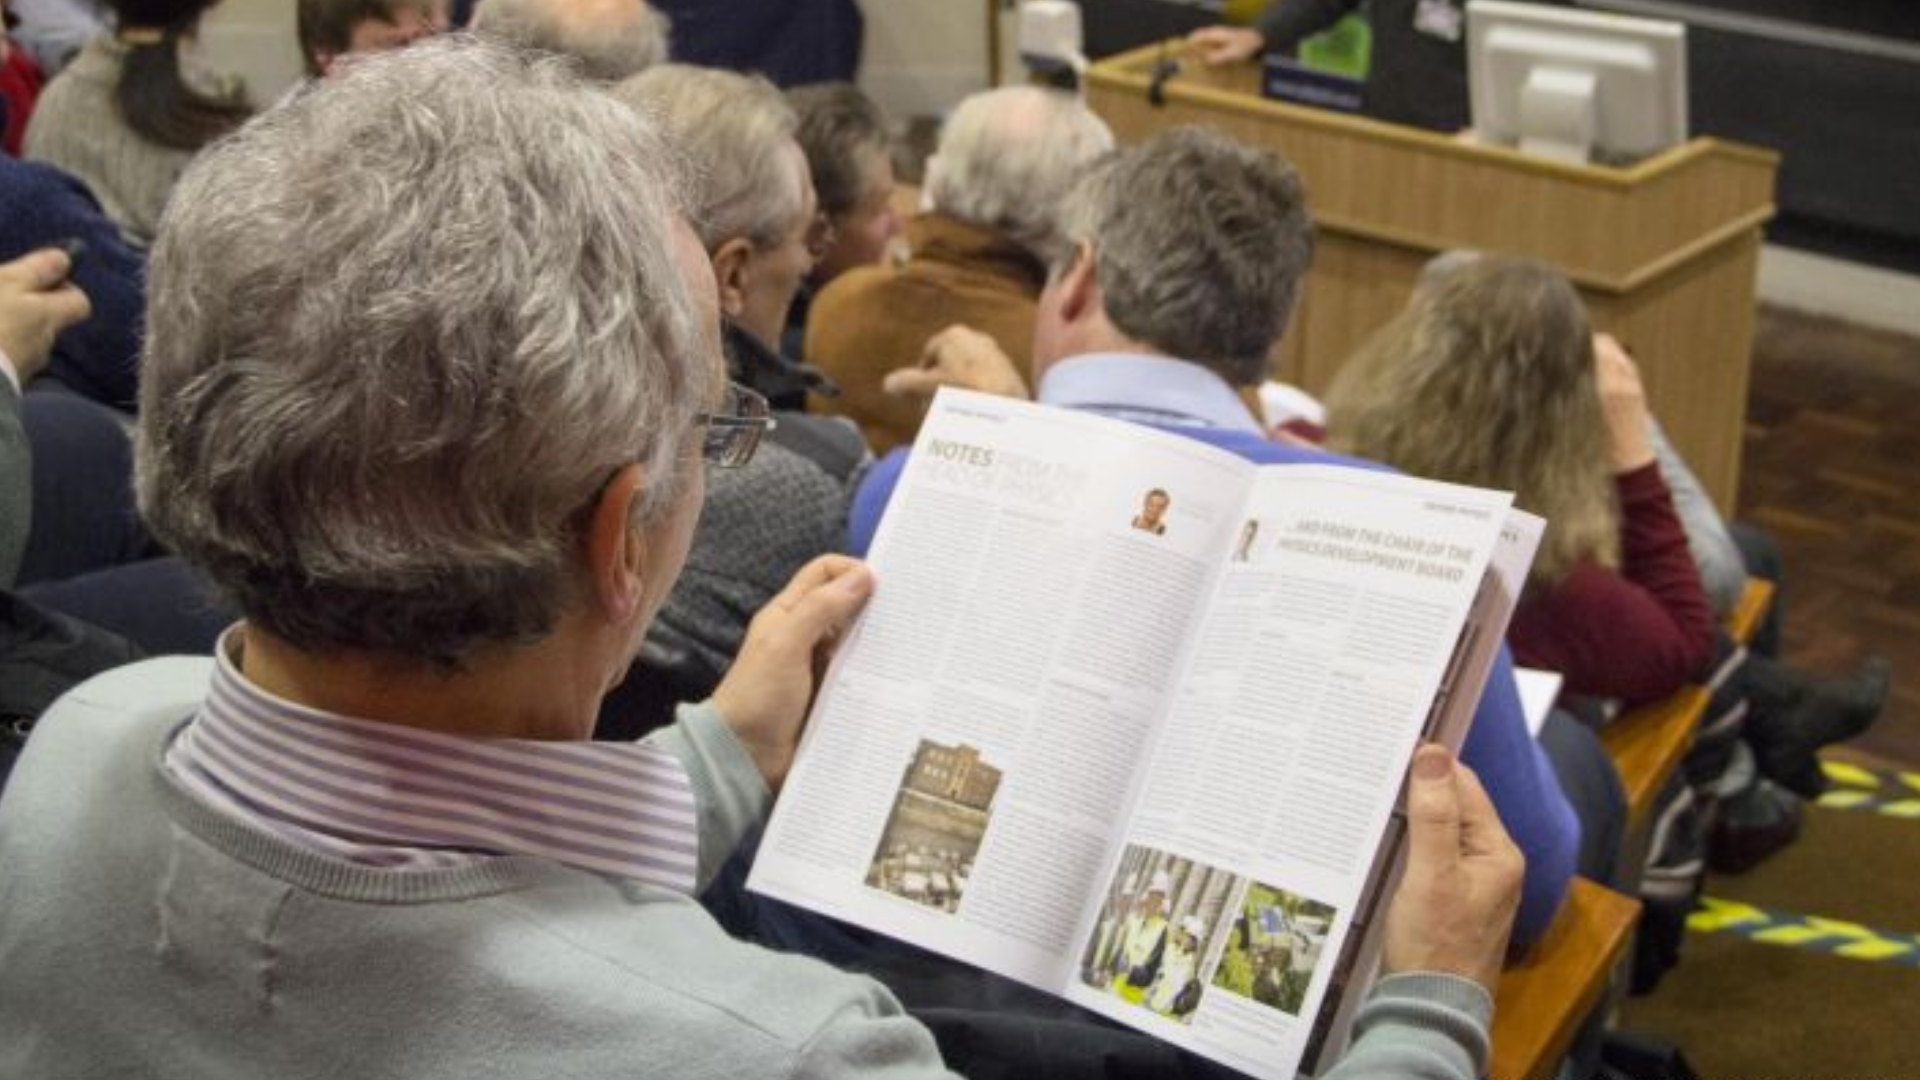 Alumnus reading a physics newsletter at an event